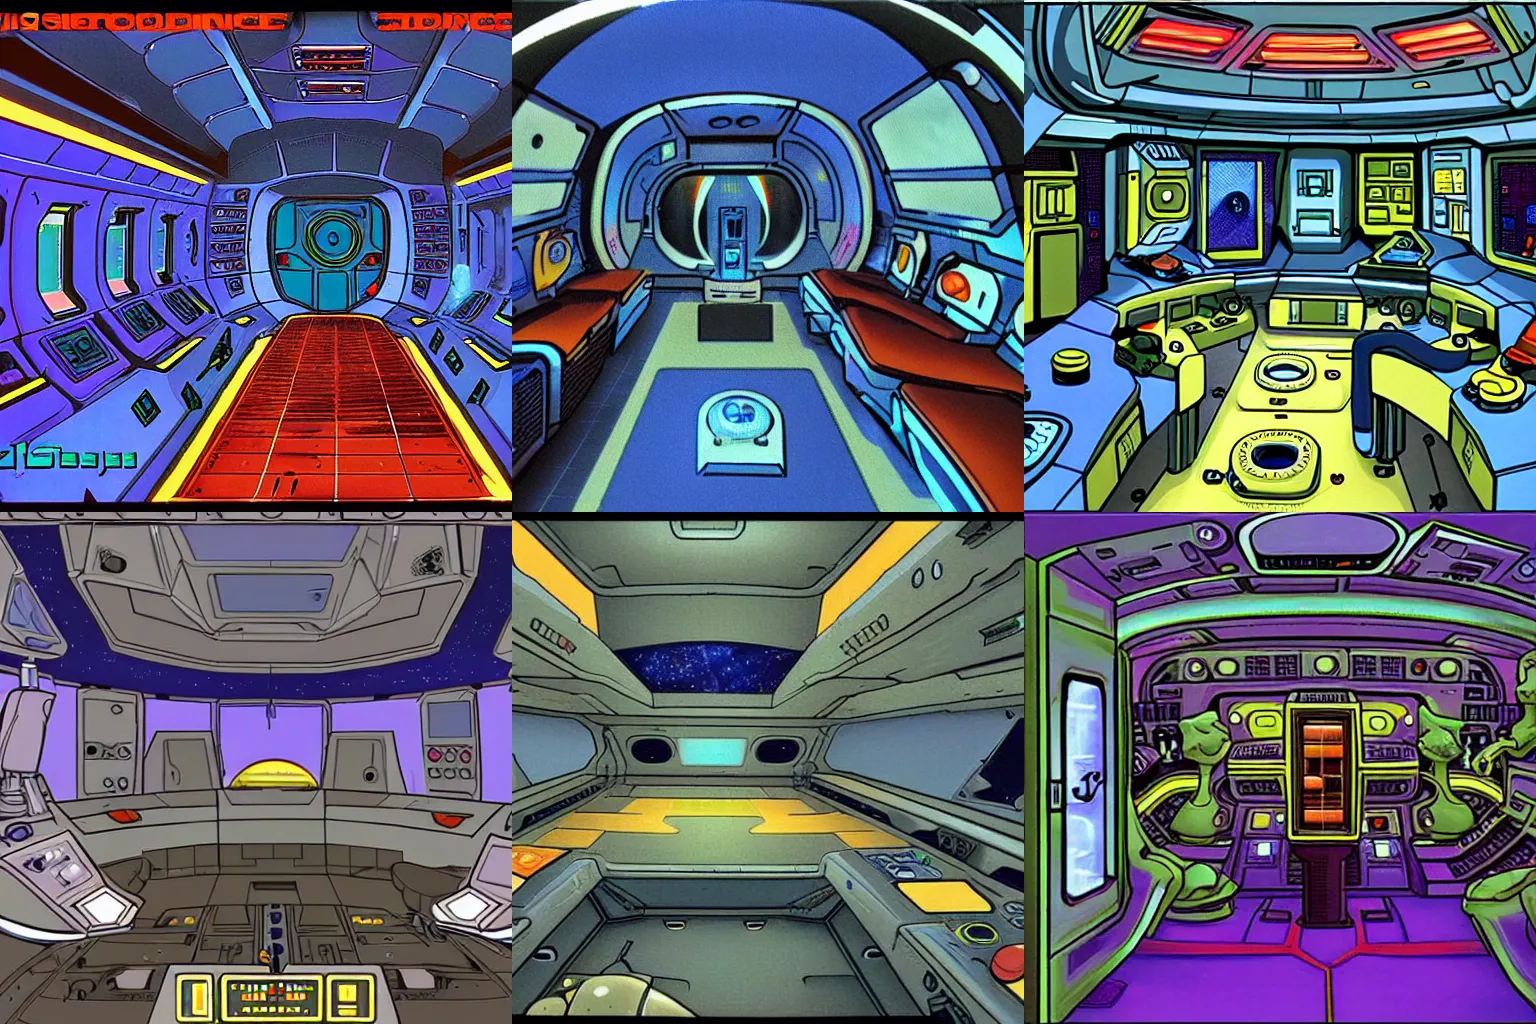 Prompt: inside a spaceship, from a space themed LucasArts point and click 2D graphic adventure game, made in 1999